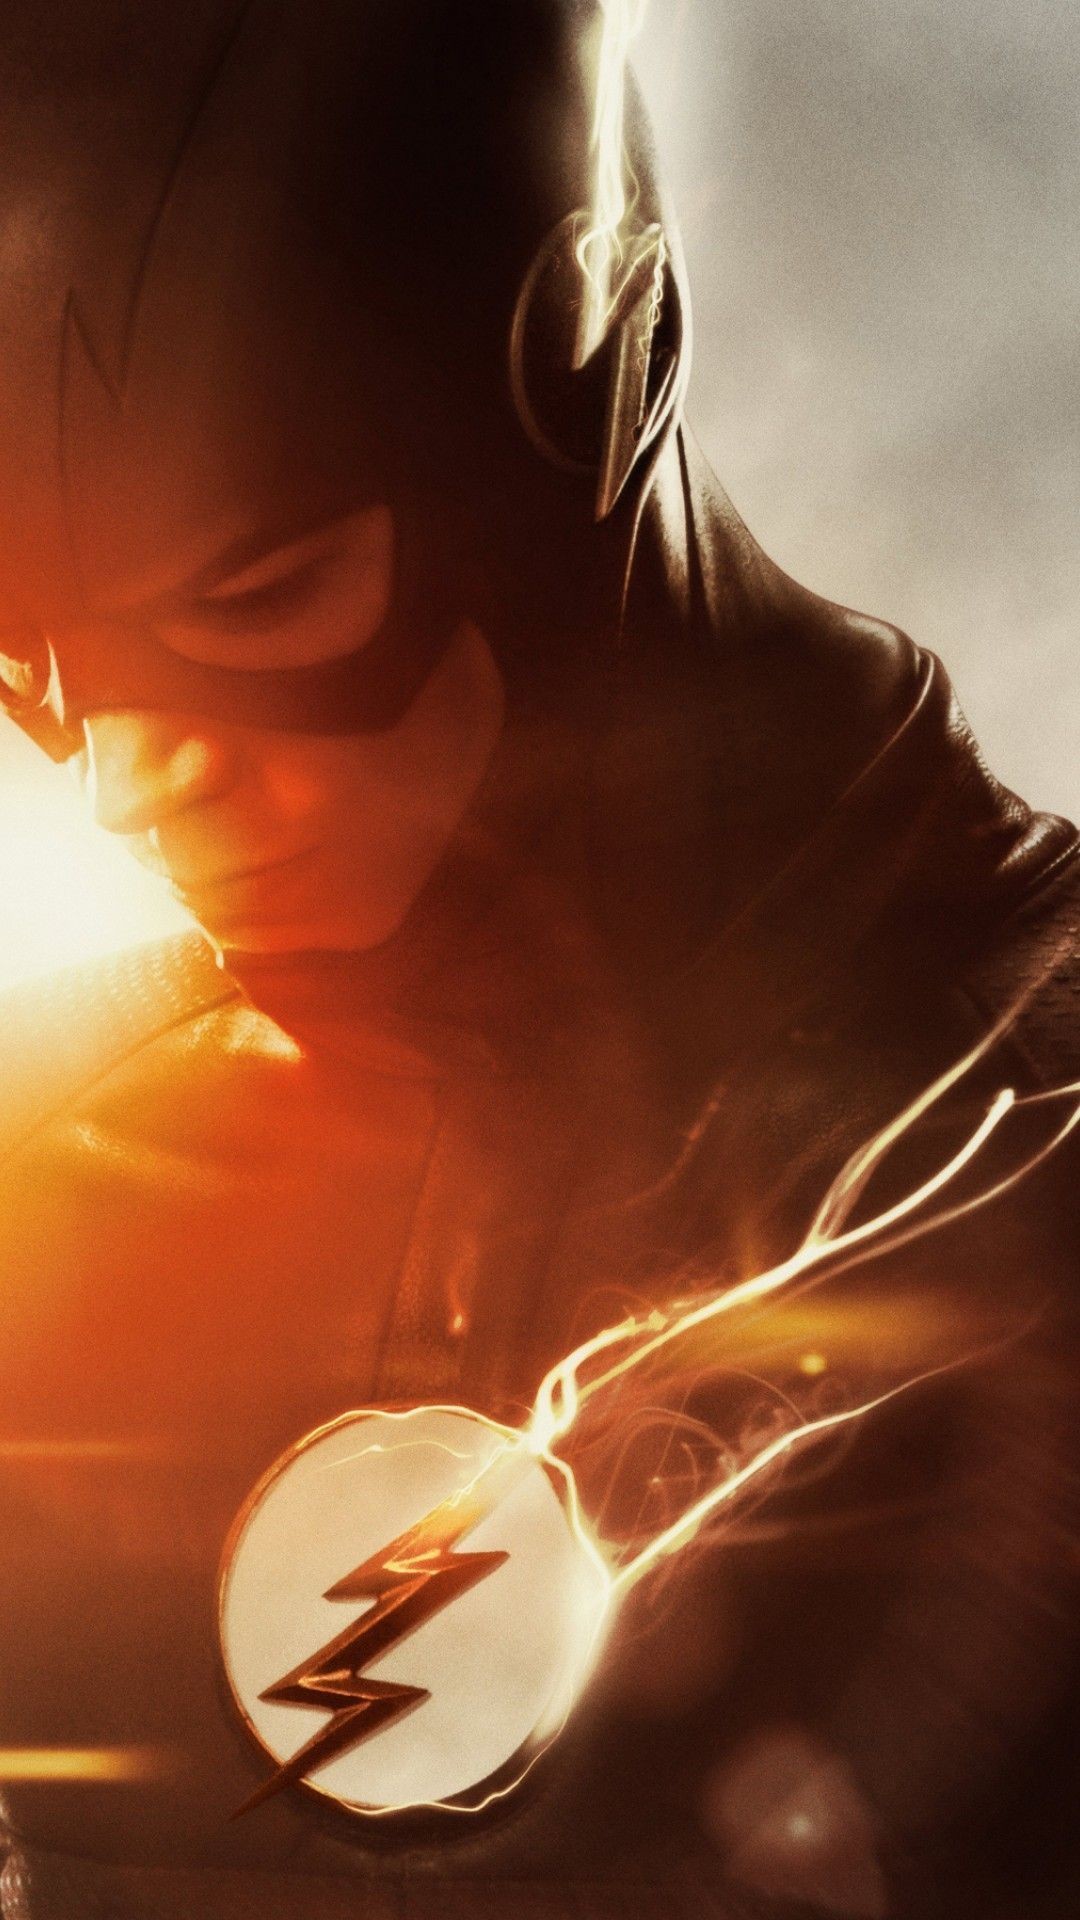 flash wallpaper hd for android and iphone  1080p  Flash wallpaper The  flash Superhero wallpaper